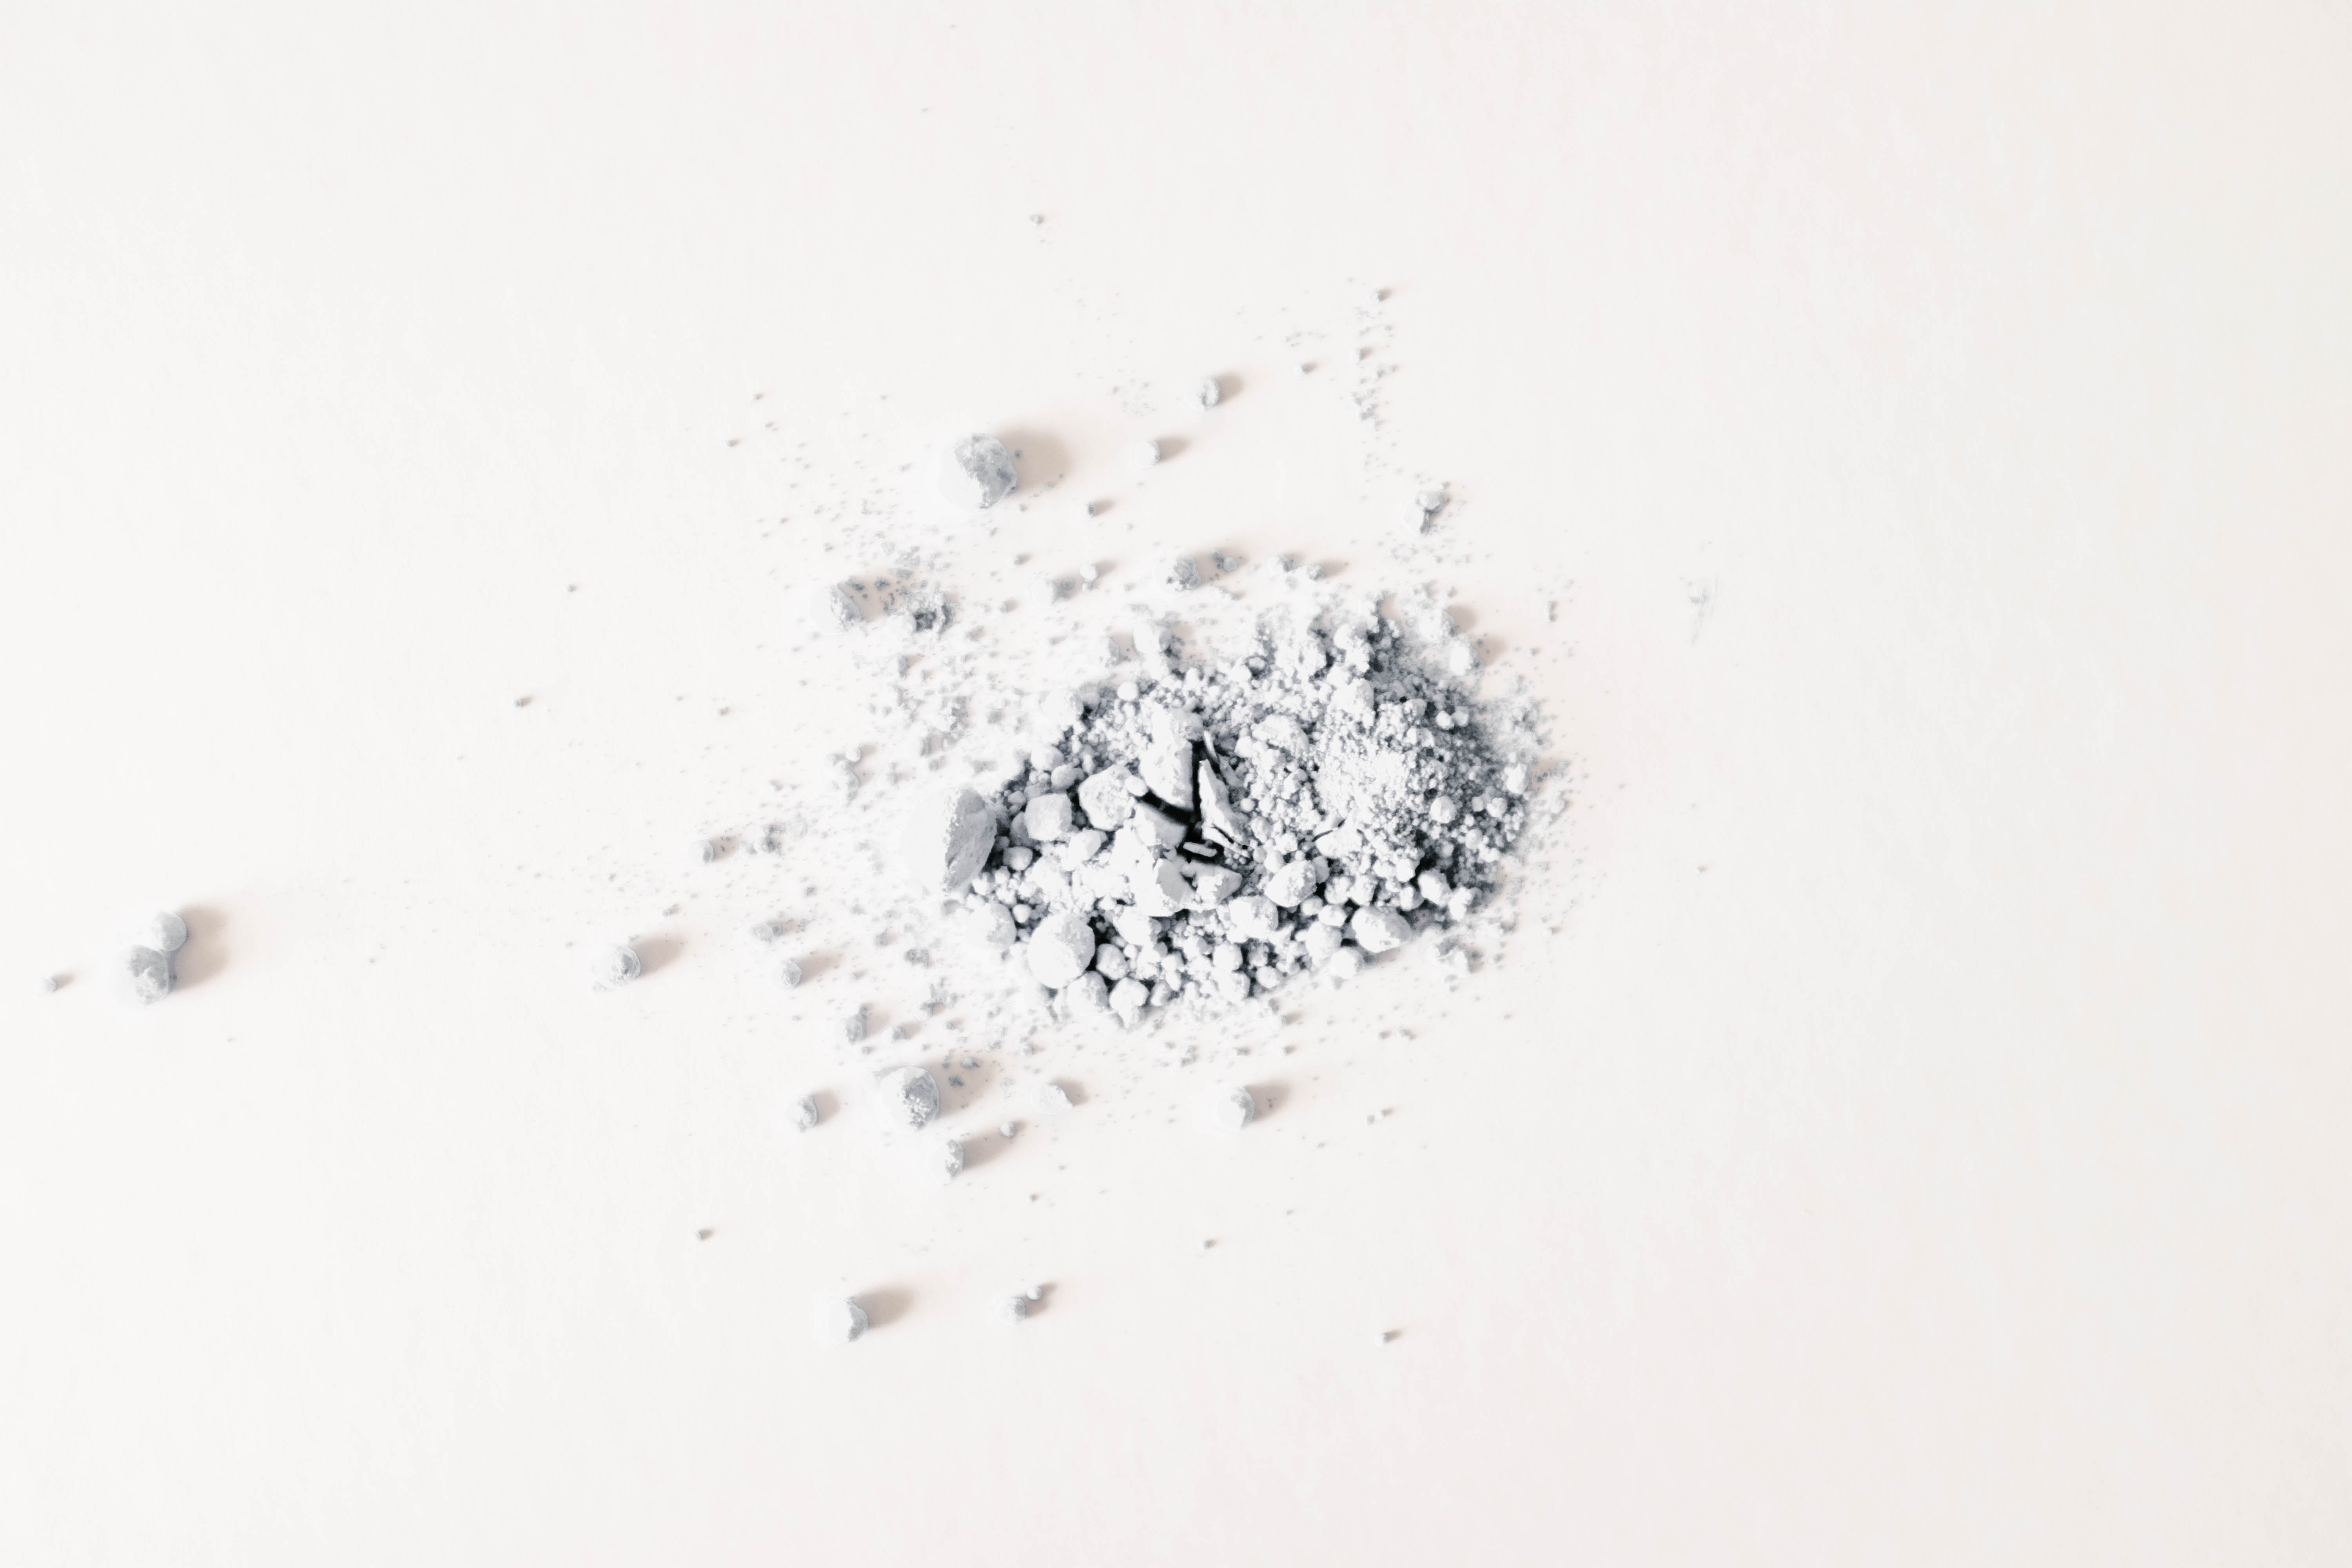 Pile of white powder on a surface